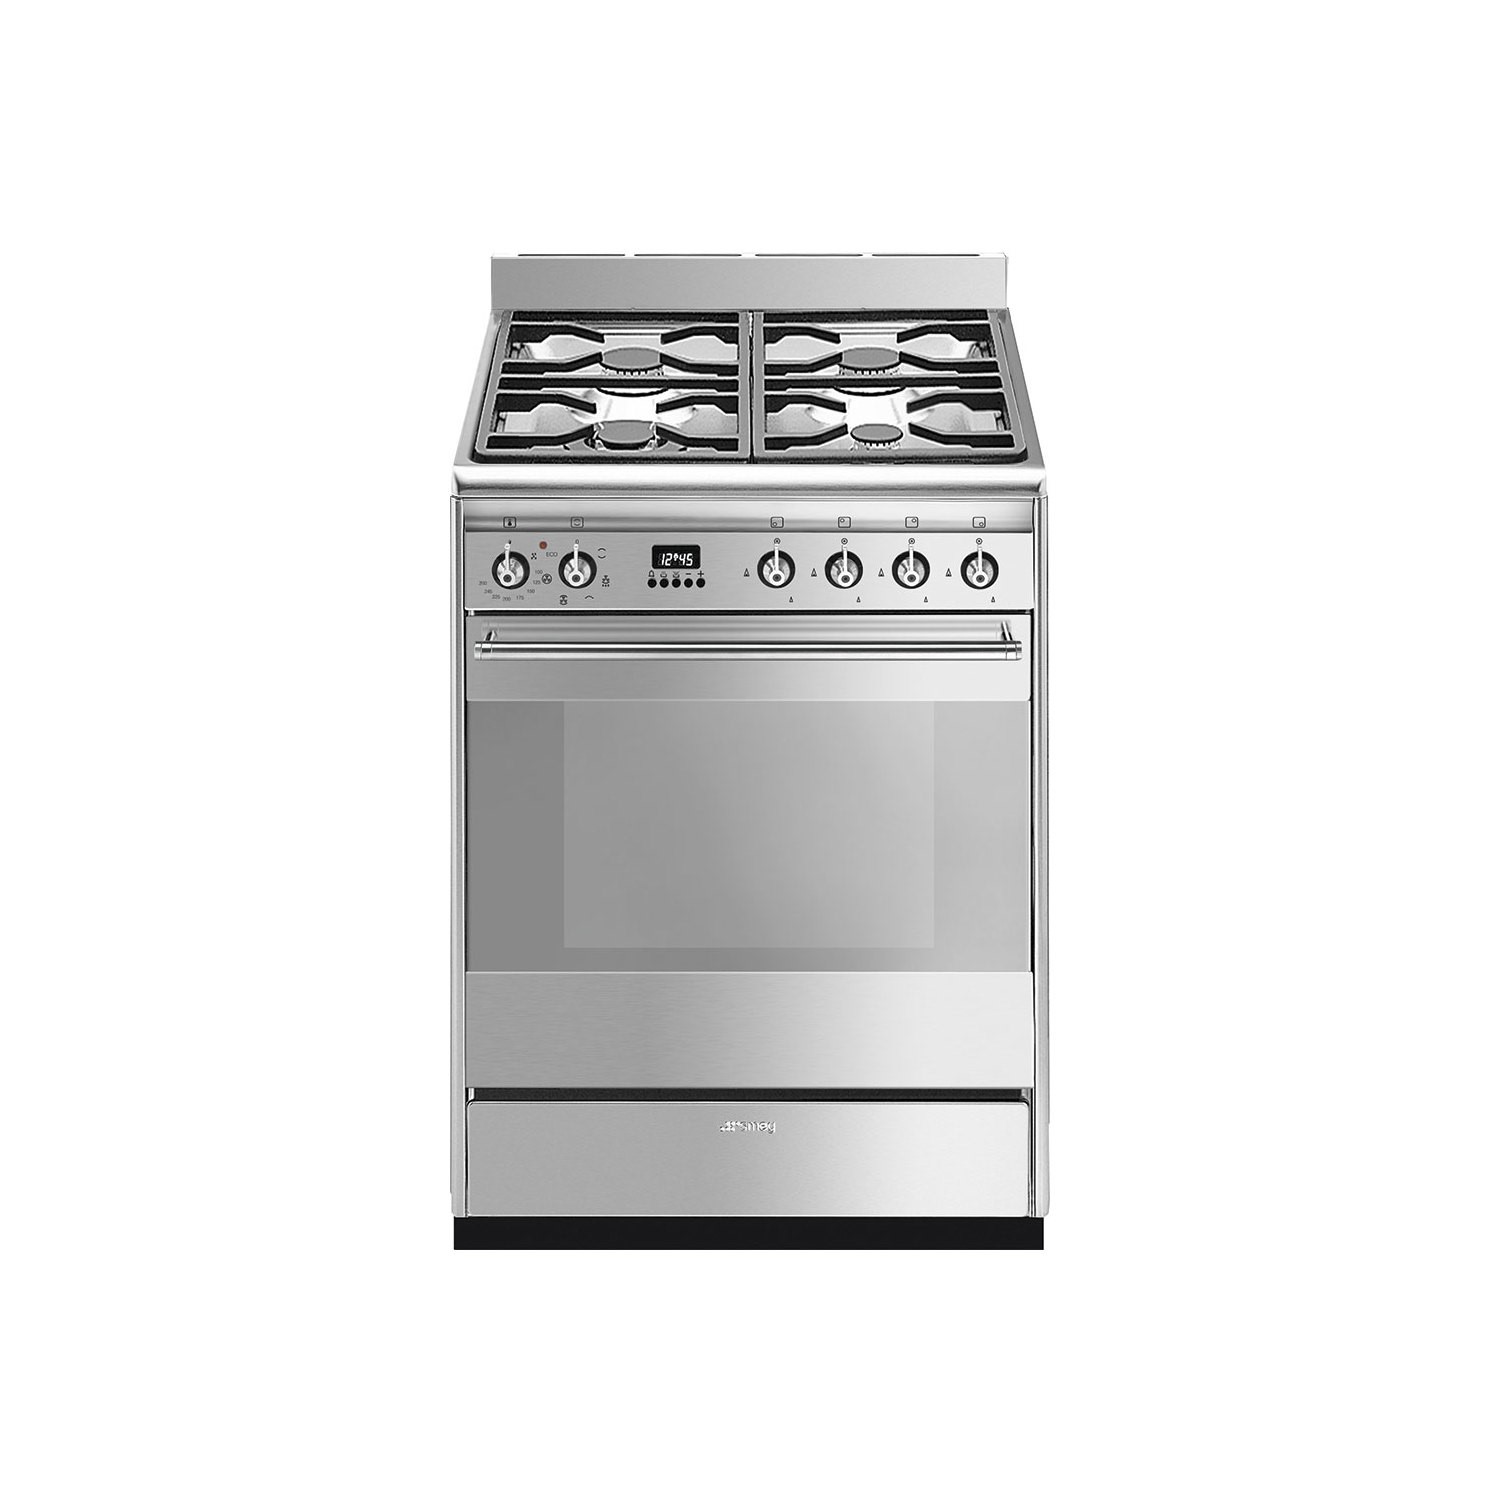 Smeg Concert SUK61MX9 60cm Dual Fuel Cooker - Stainless Steel - A Rated